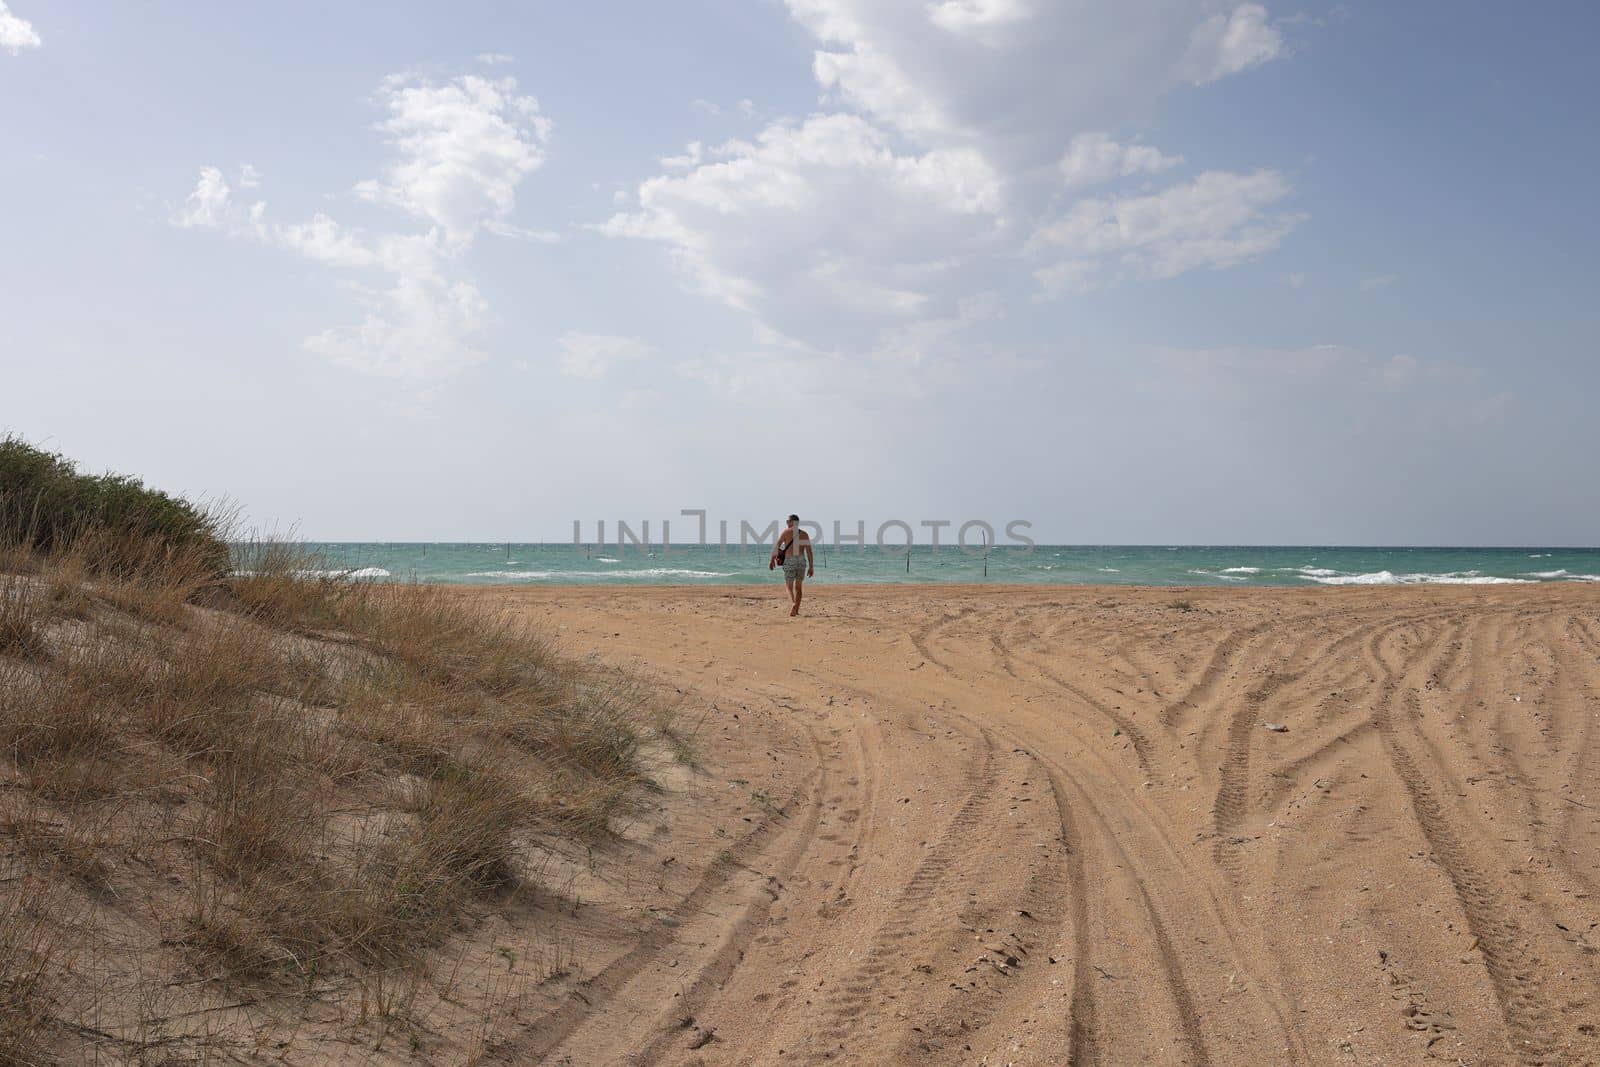 Sea access to the beach. Wide access to the beach with sand and grass. Man walking towards the water towards the beach